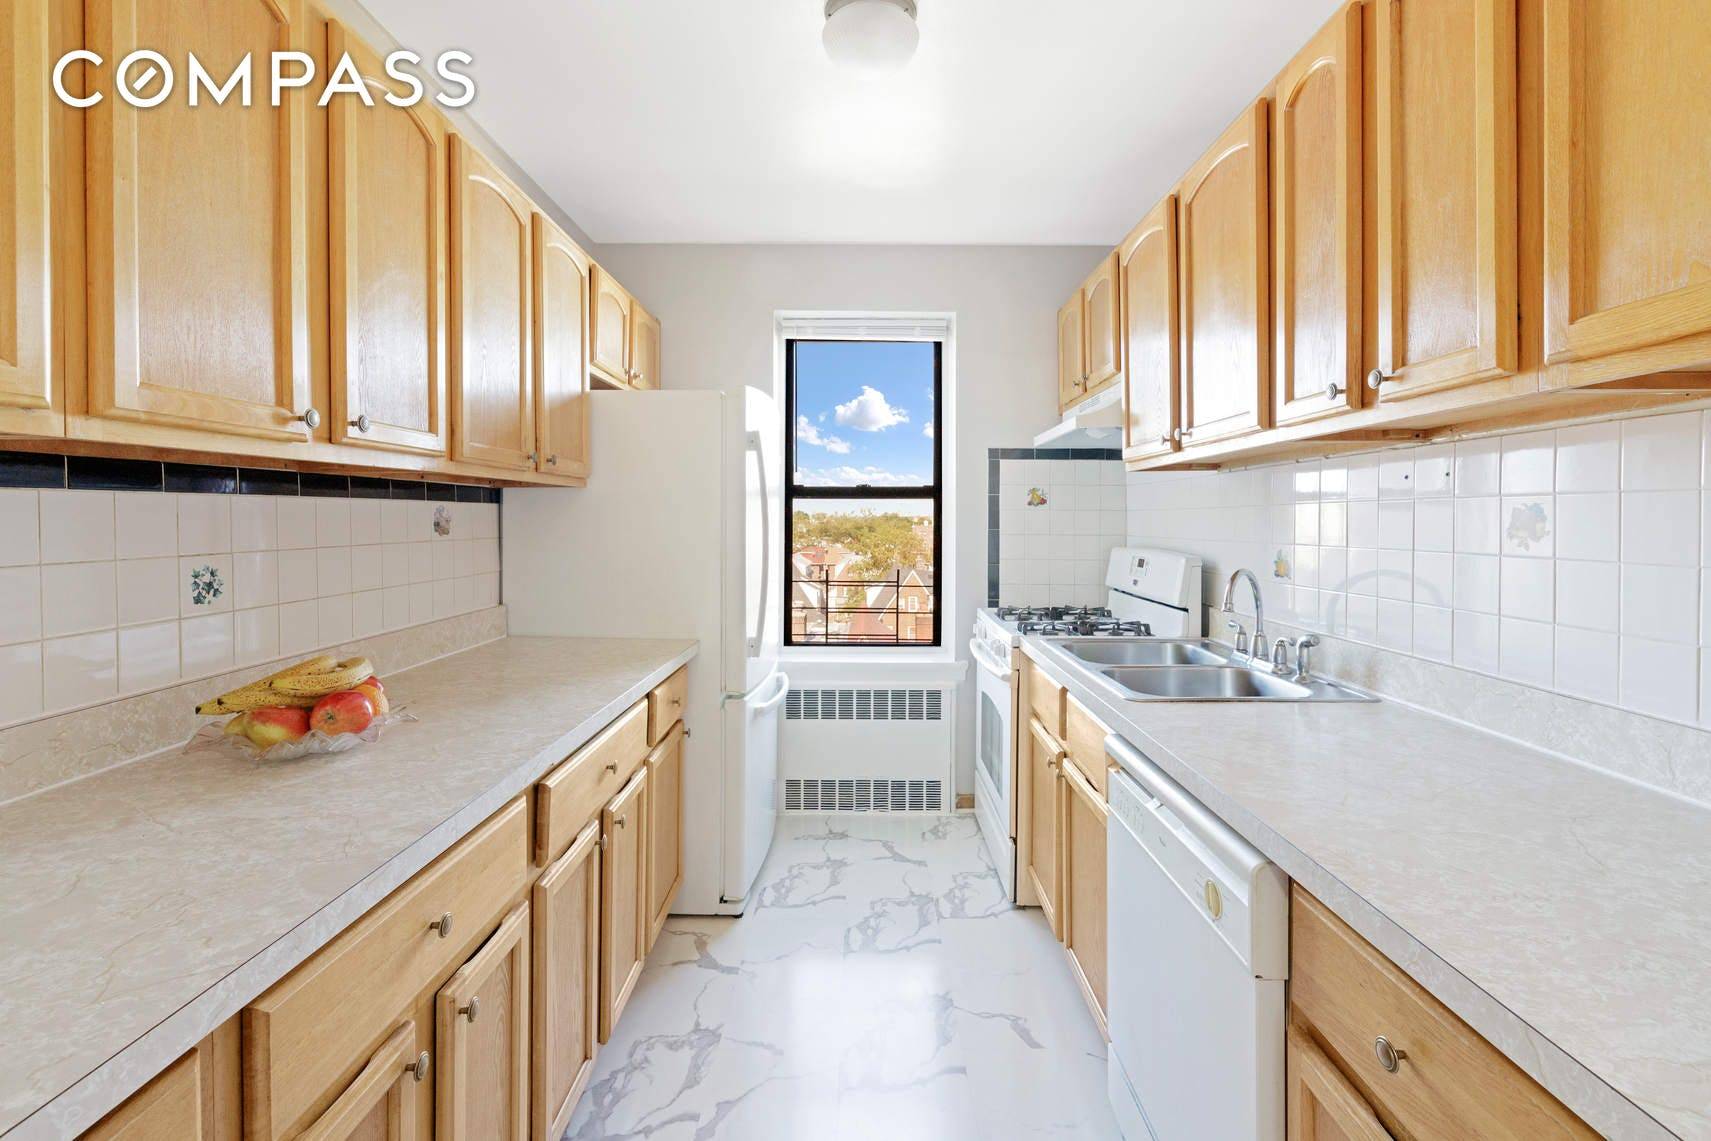 Welcome home to your quiet oasis here in Jackson Heights.